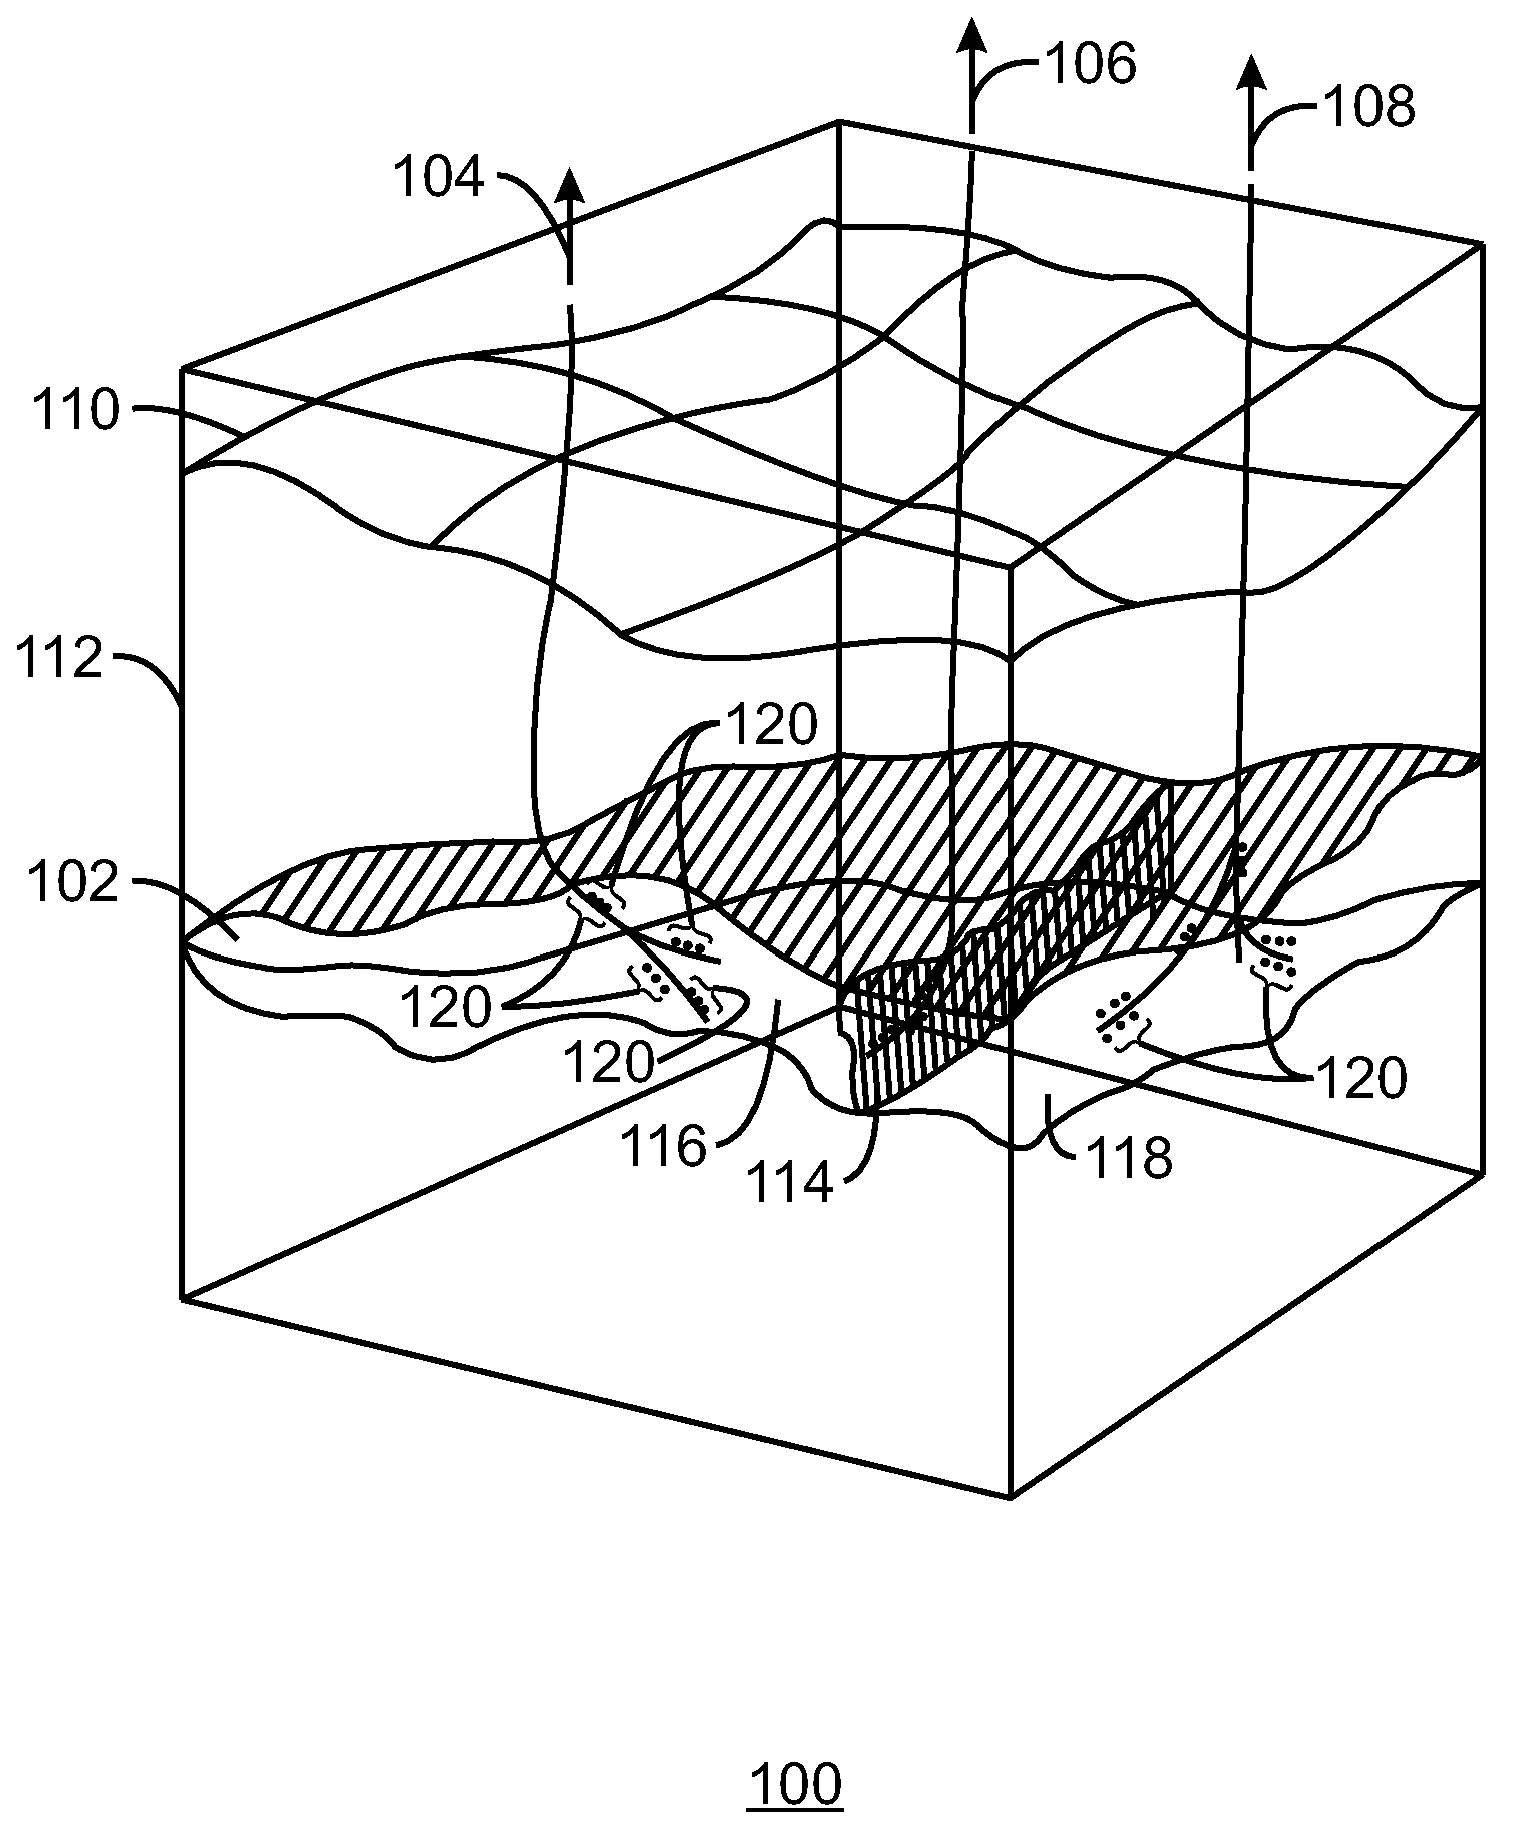 Method and system for partitioning parallel simulation models